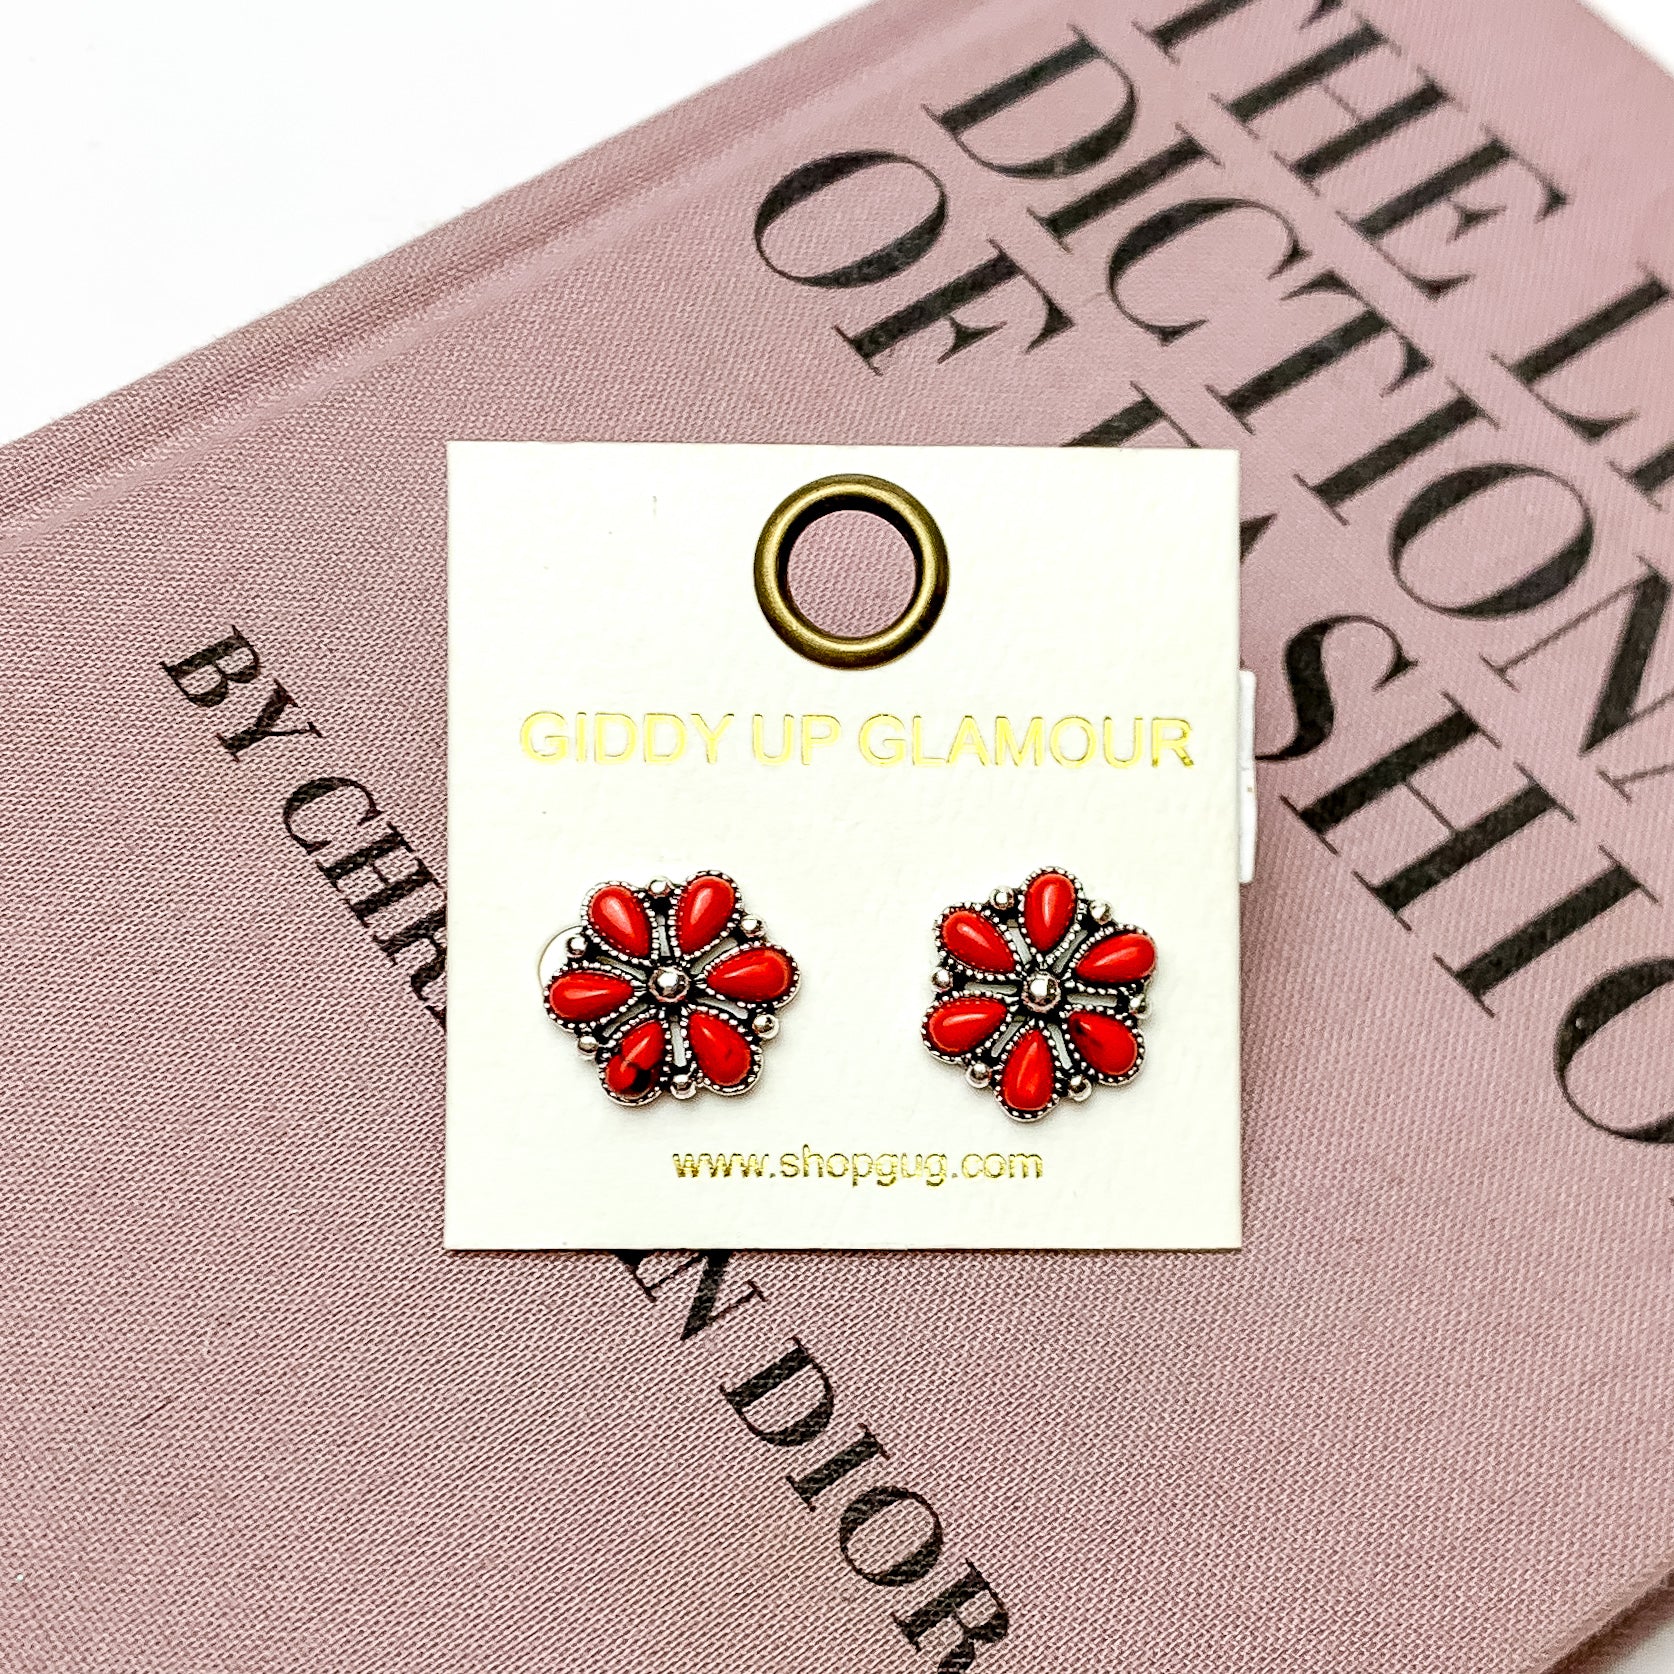 Flower Post Earrings with Faux Red Stones in Silver Tone - Giddy Up Glamour Boutique